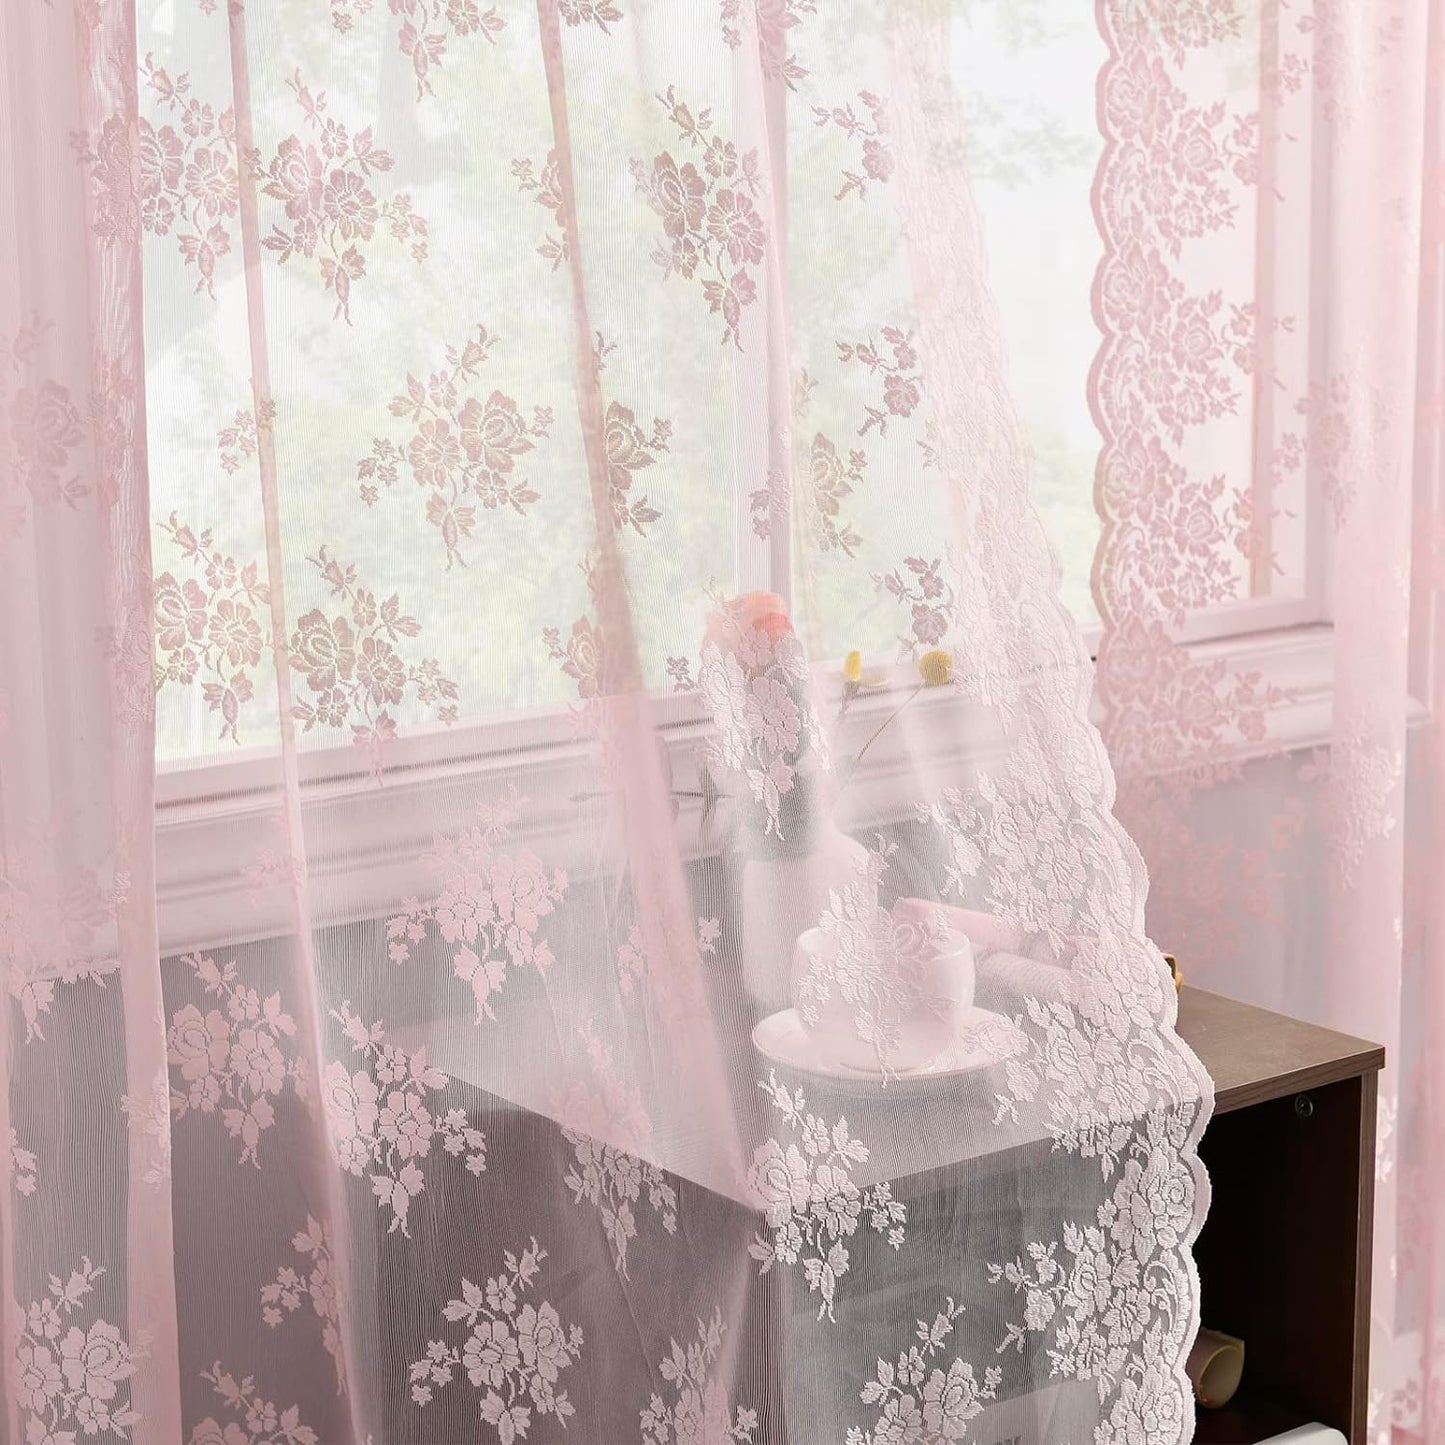 Kotile Sage Green Sheer Valance Curtain for Windows, Rustic Floral Spring Sheer Window Valance Curtain 18 Inch Length, Light Filtering Rod Pocket Lace Valance, 52 X 18 Inch, 1 Panel, Sage Green  Kotile Textile Pink 52 In X 54 In (W X L) 